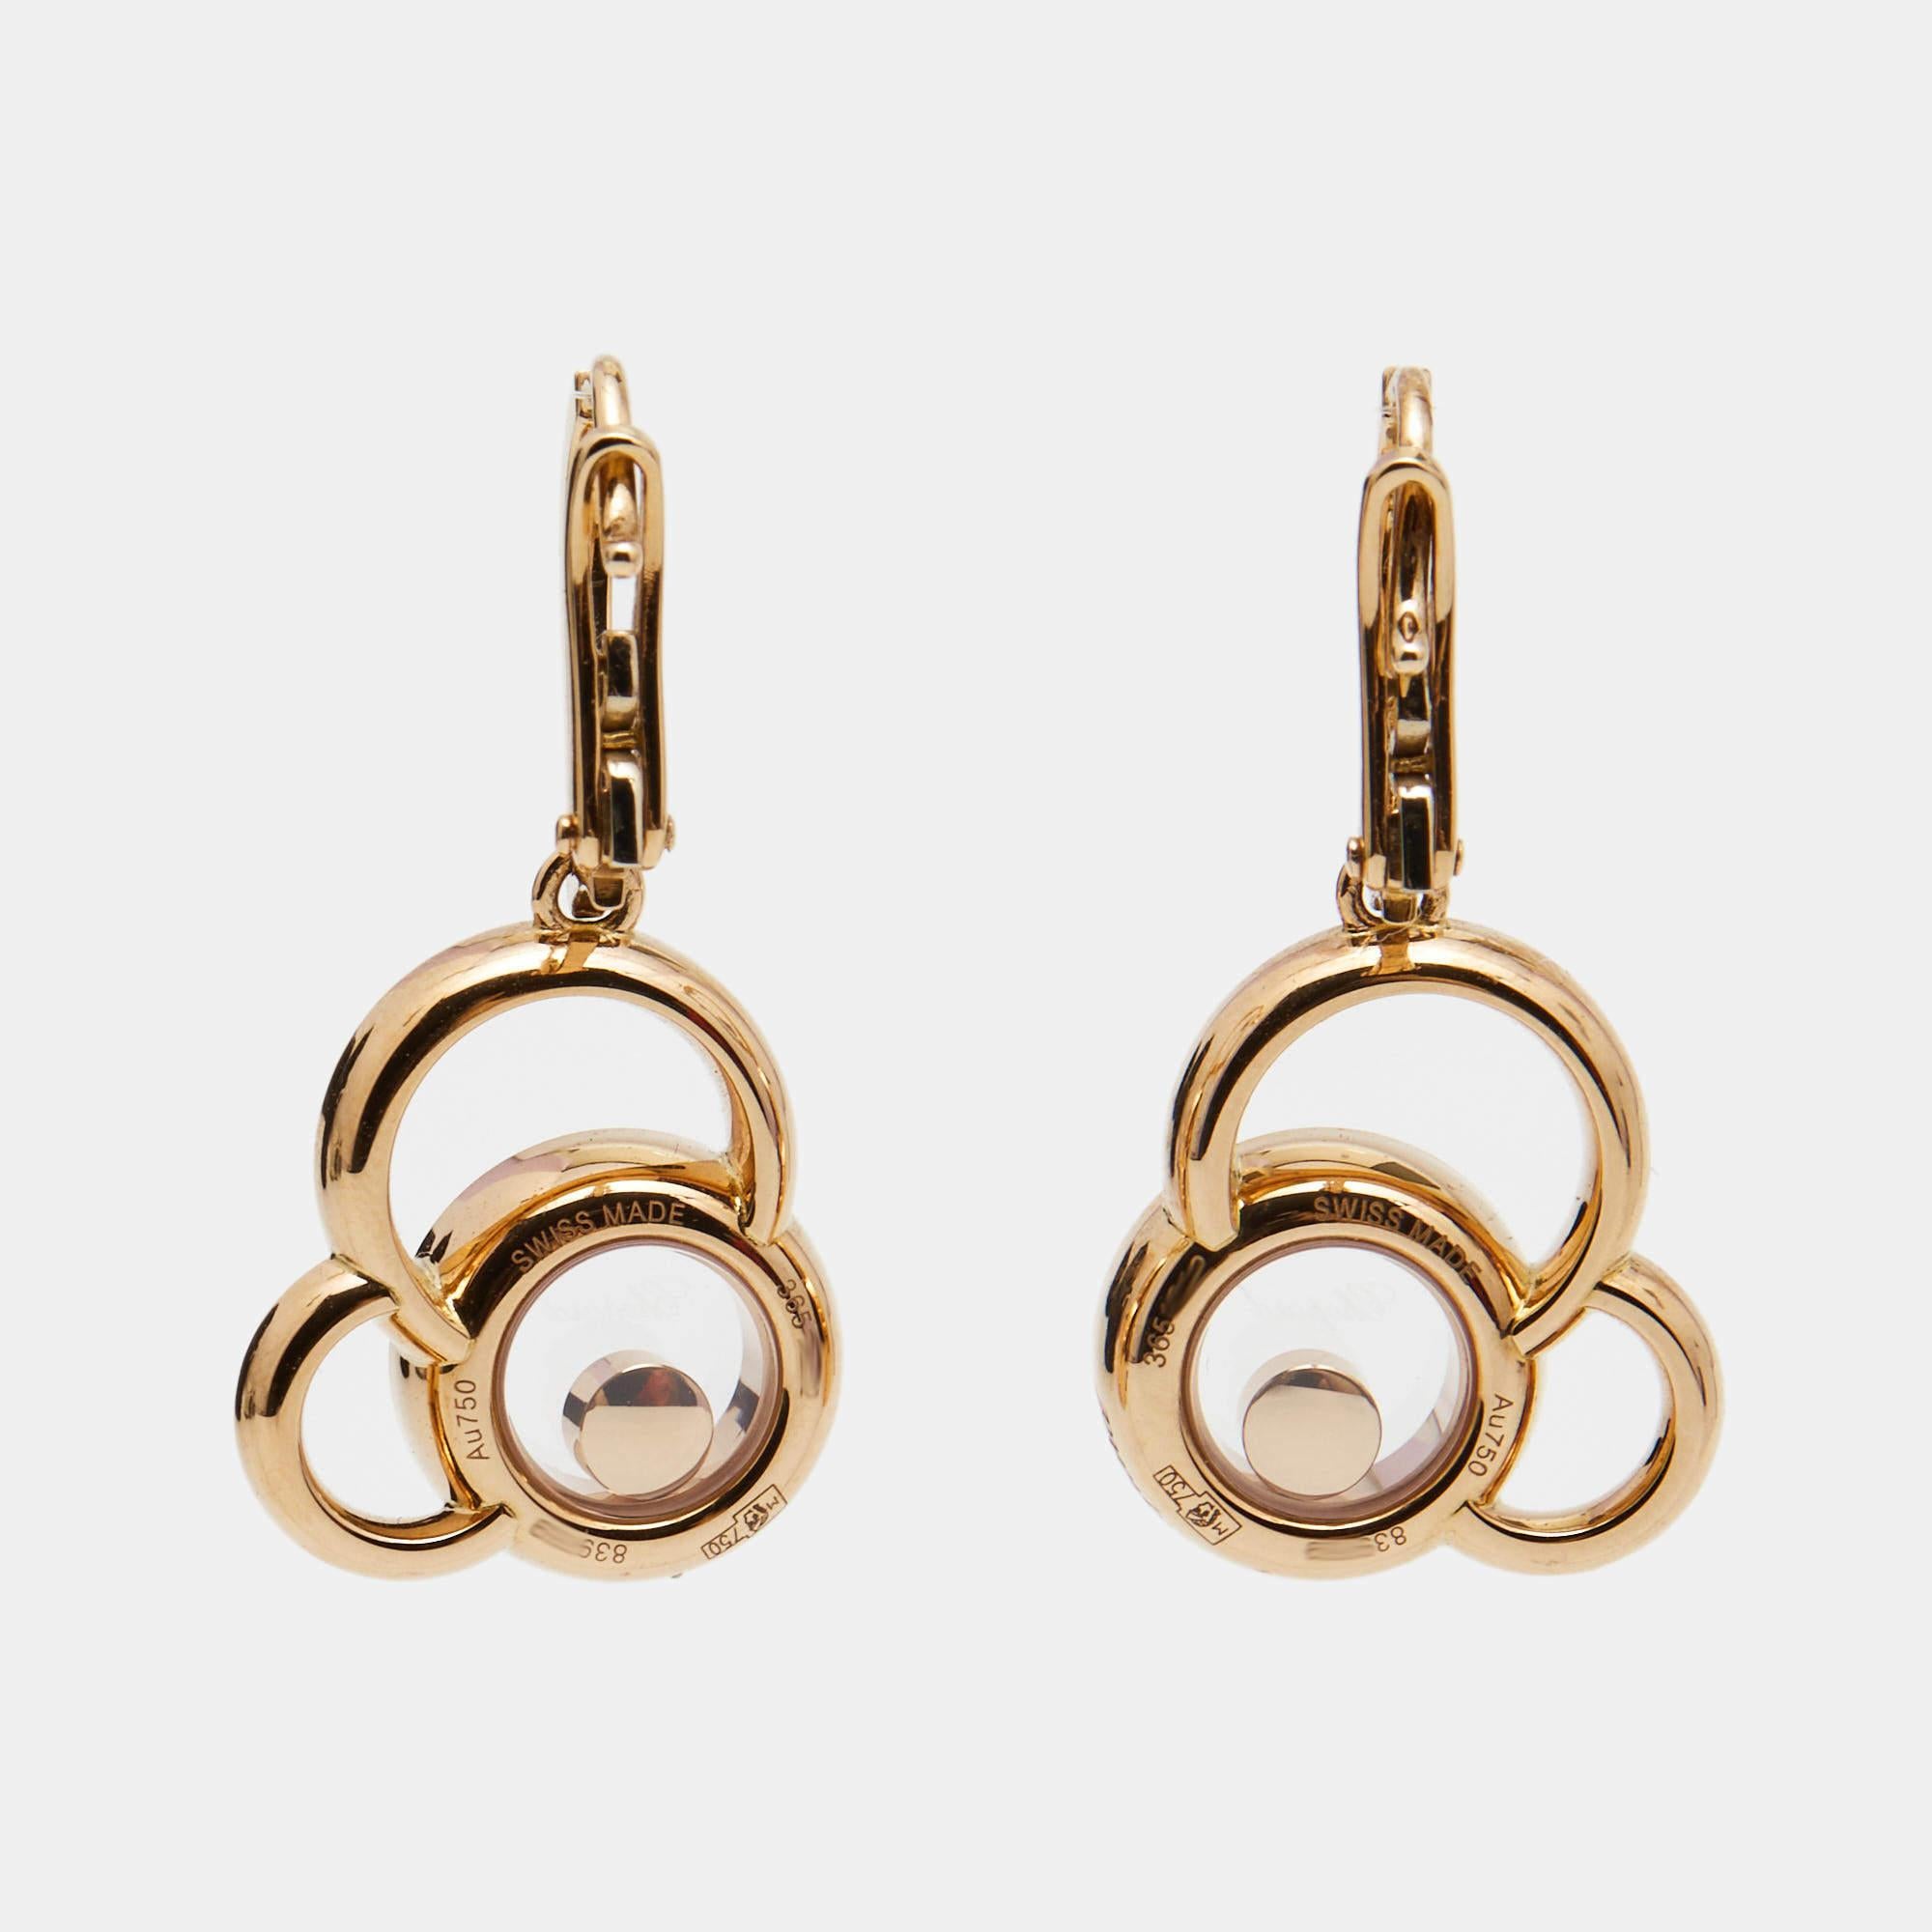 The Chopard Happy Dreams earrings are exquisite and elegant pieces of jewelry. Crafted in luxurious 18k rose gold, they feature a delicate design with a dreamy floating diamond in each earring. These earrings are a perfect blend of sophistication